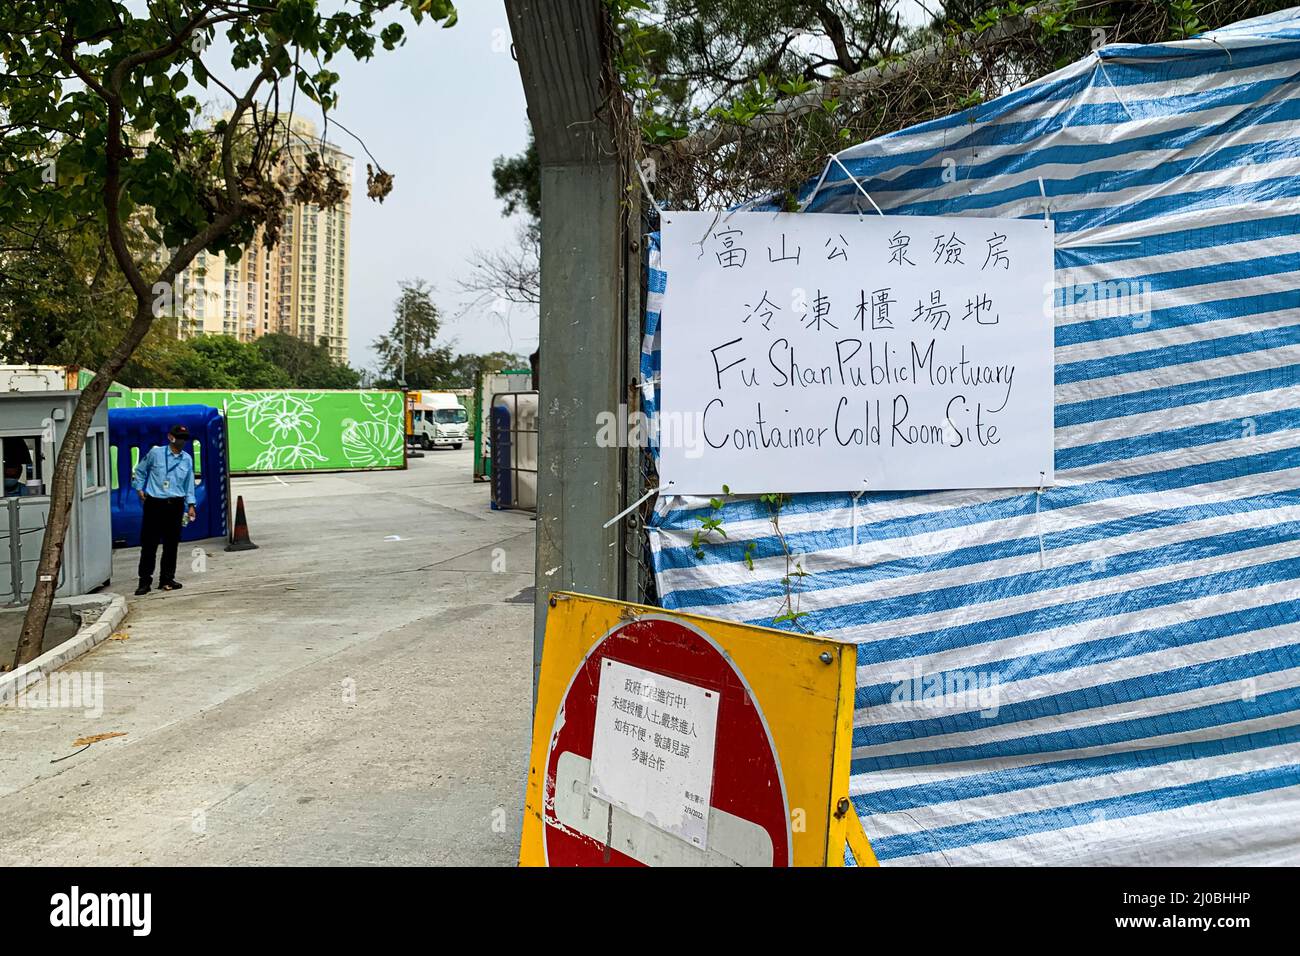 Hong Kong, China. 18th Mar, 2022. Refrigerated containers are seen at the Fu Shan Public Mortuary. Hong Kong health authorities have set up refrigerated shipping containers outside a public mortuary to store dead bodies as mortuaries and hospitals are running out of space. Credit: ZUMA Press, Inc./Alamy Live News Stock Photo